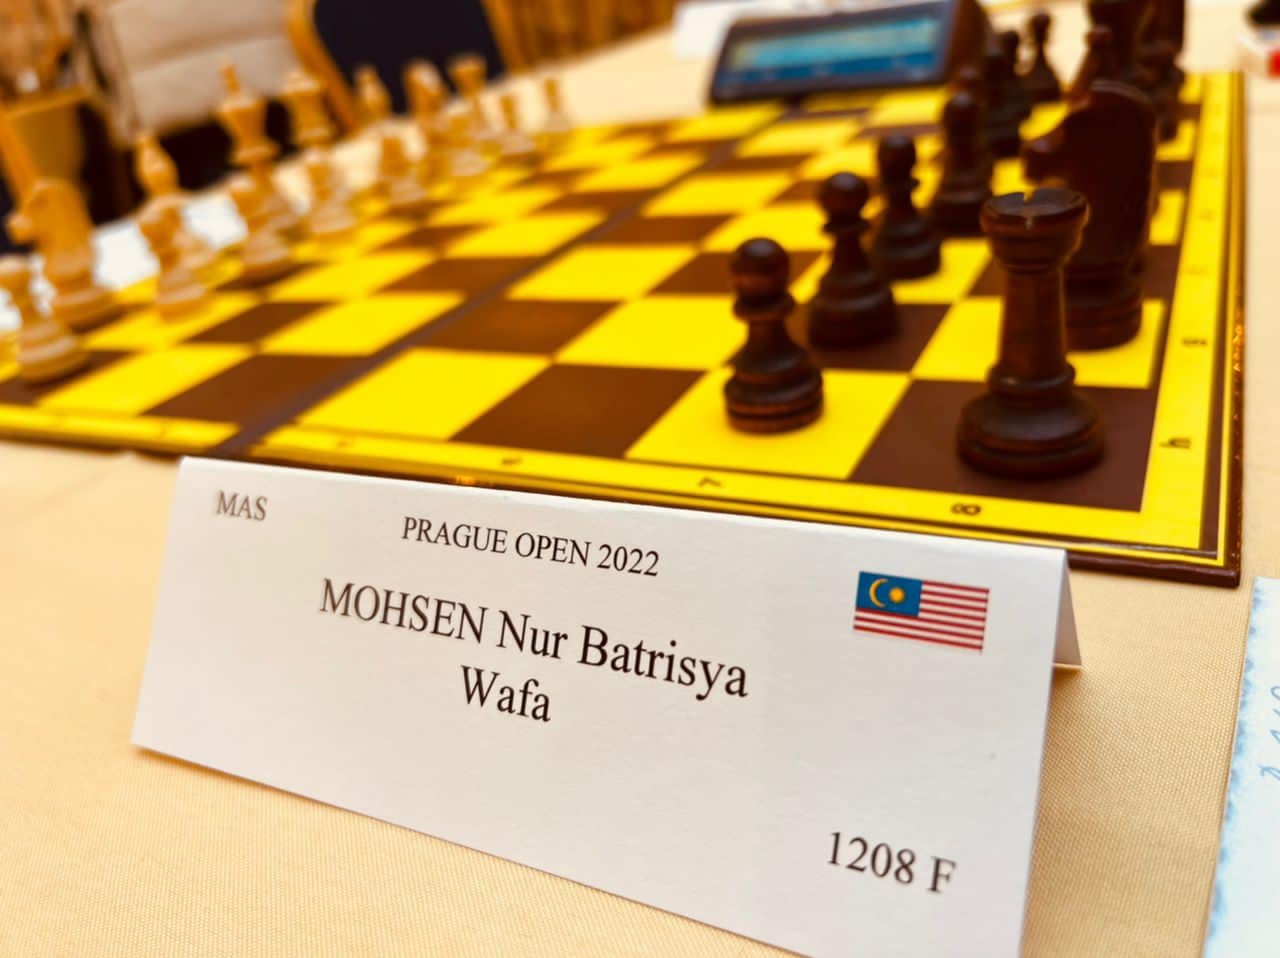 Nur Batrisya's name on a standee at the international chess tournament.